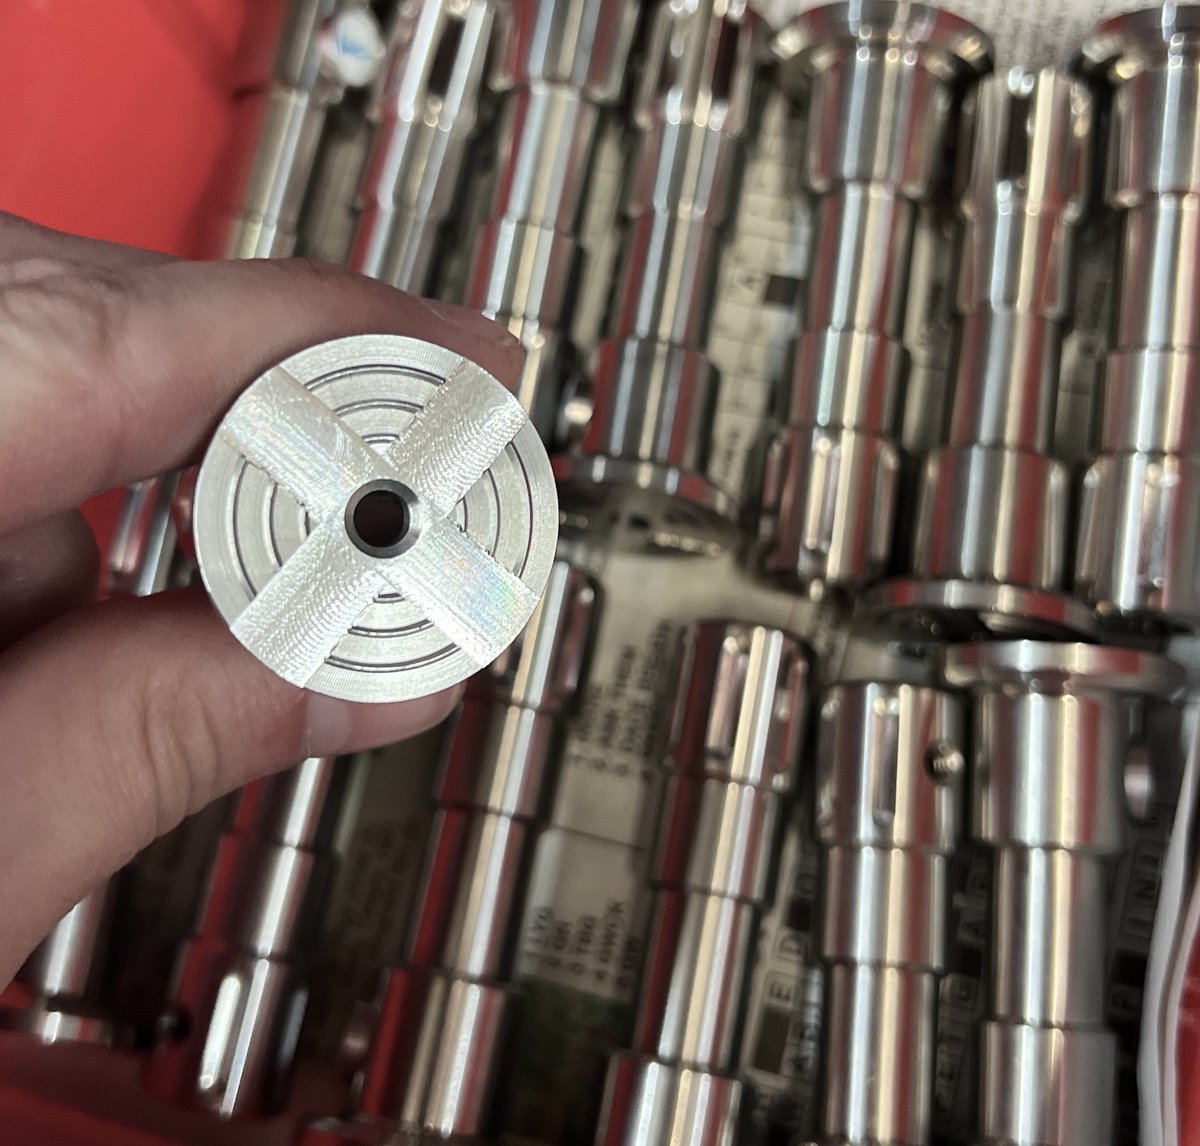 Our company has the ability to offer a vast range of services in the supply of CNC Precision Turned Parts.
.
#inroeng #turnedparts #precisionparts #cncmachined #manufacturing #cnc #London #londonturnedparts